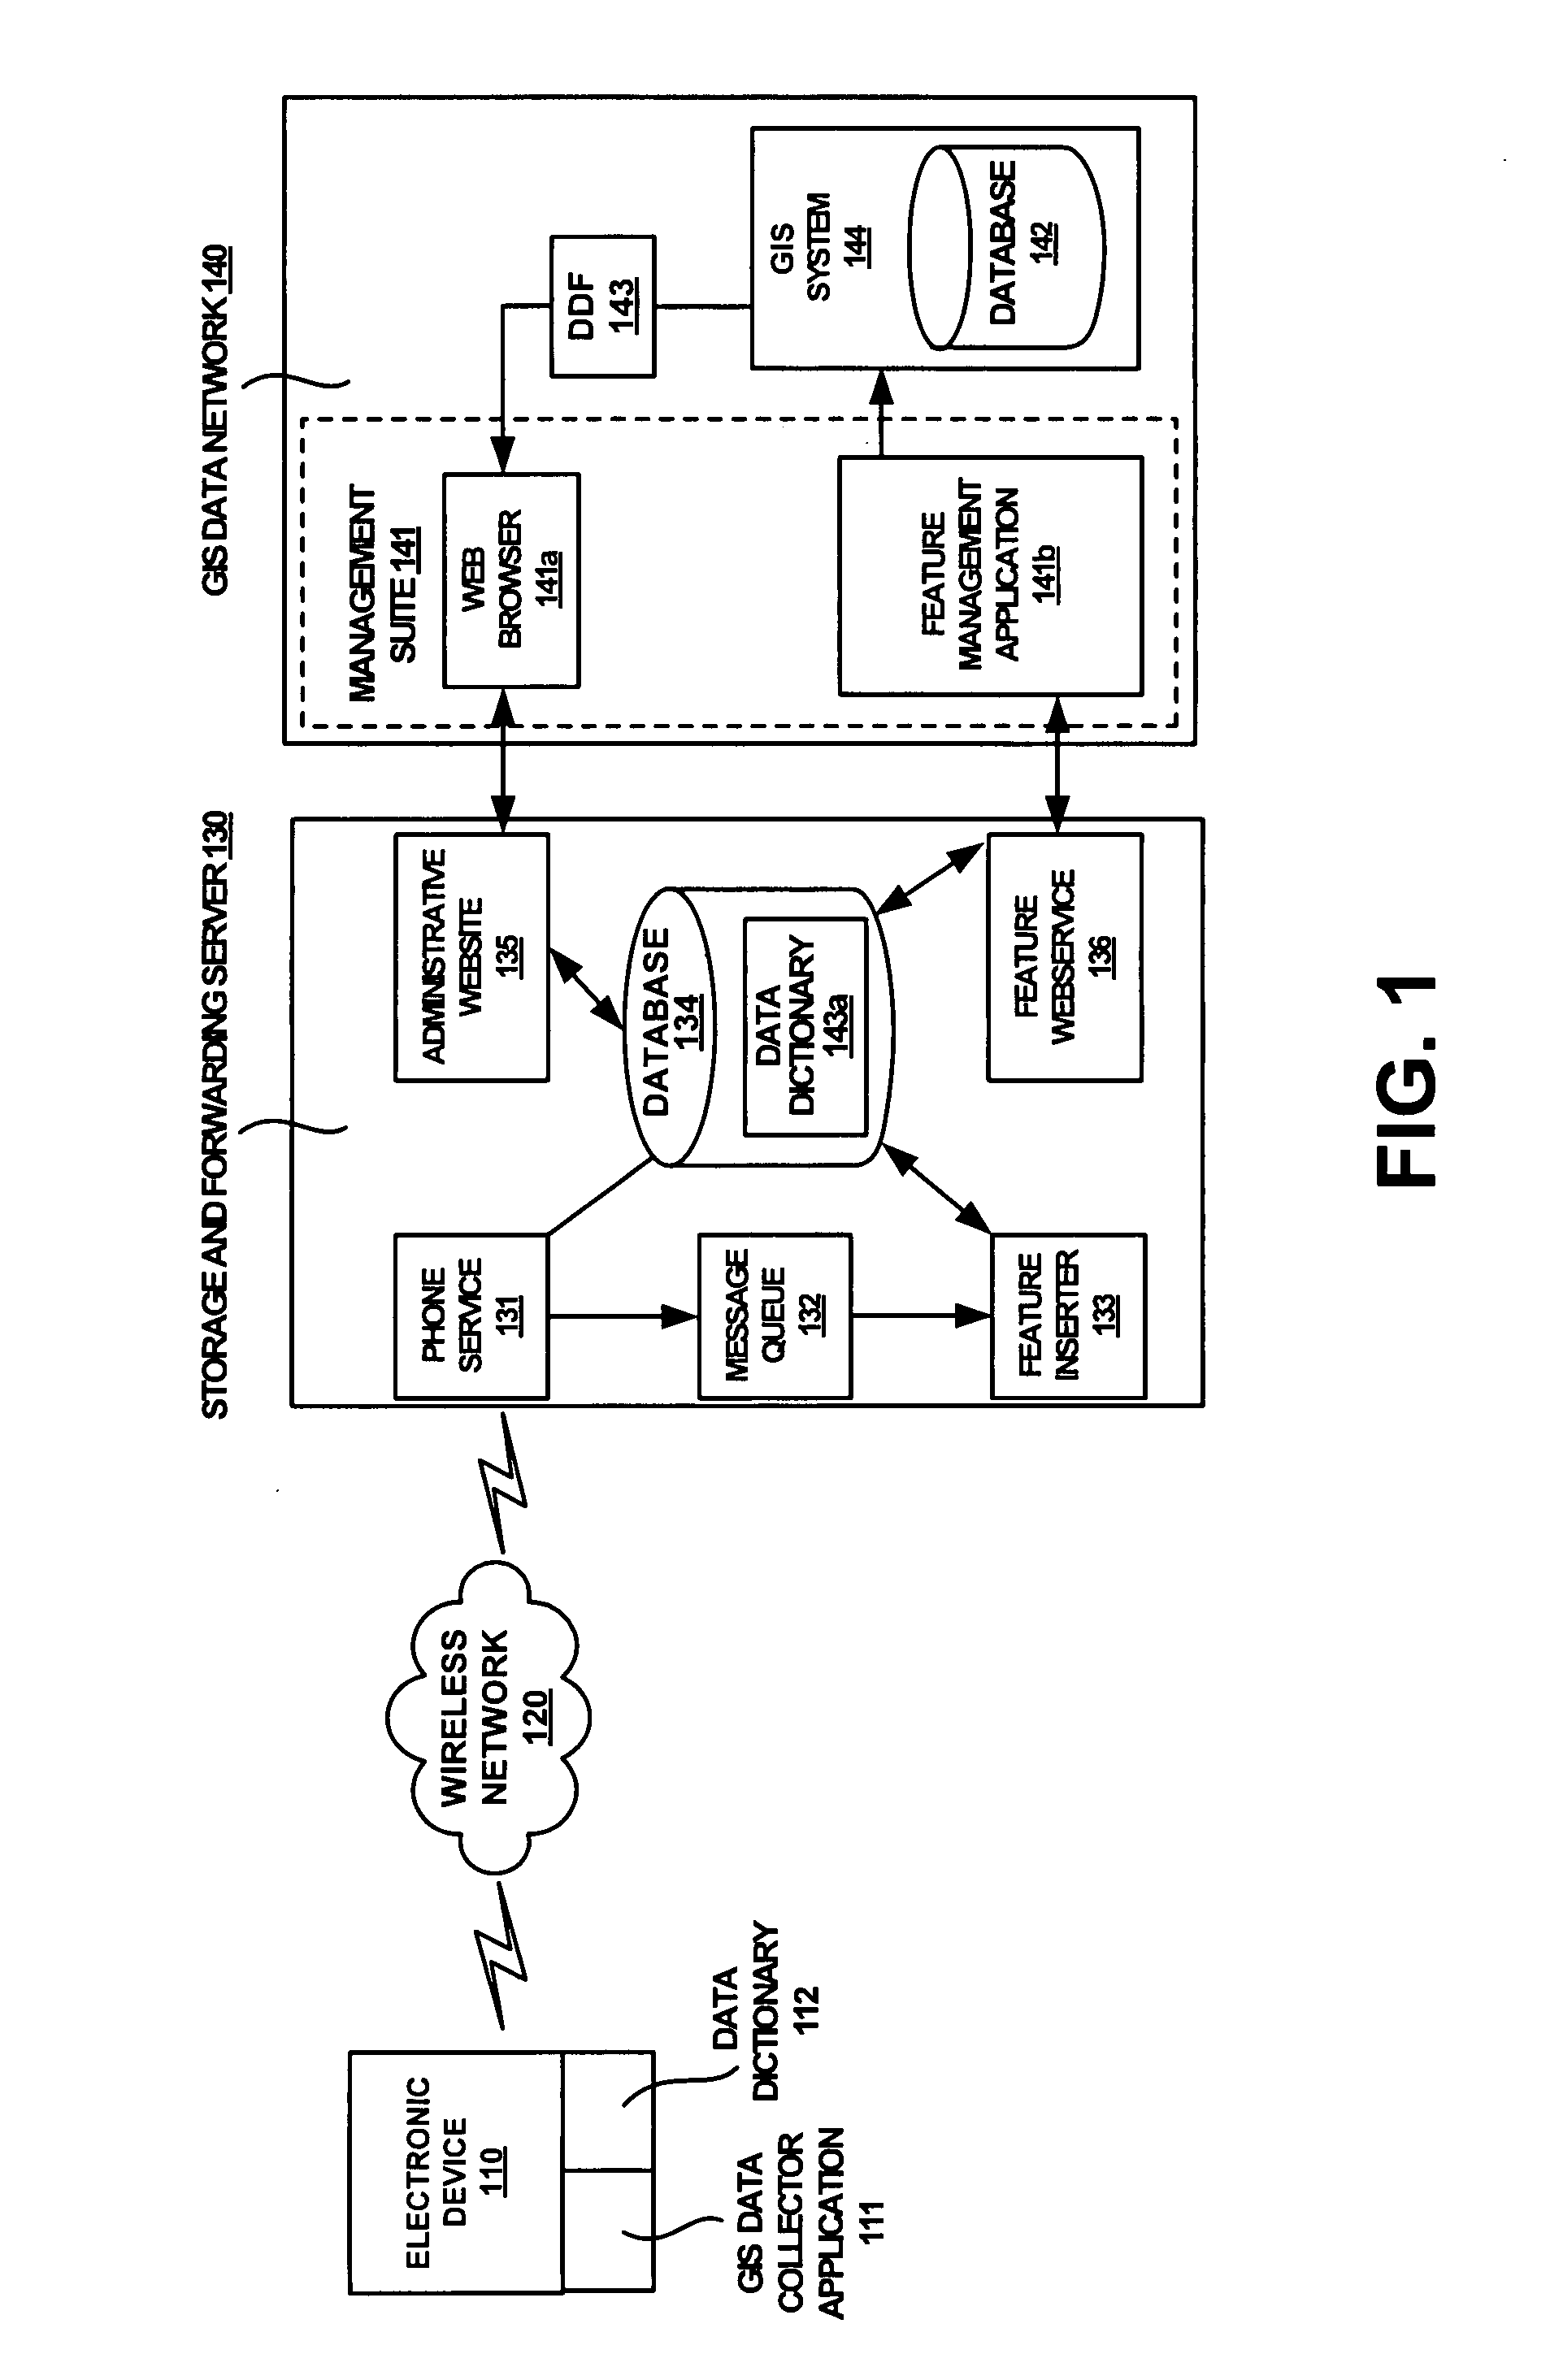 Method and system for provisioning a java equipped celluar telephone